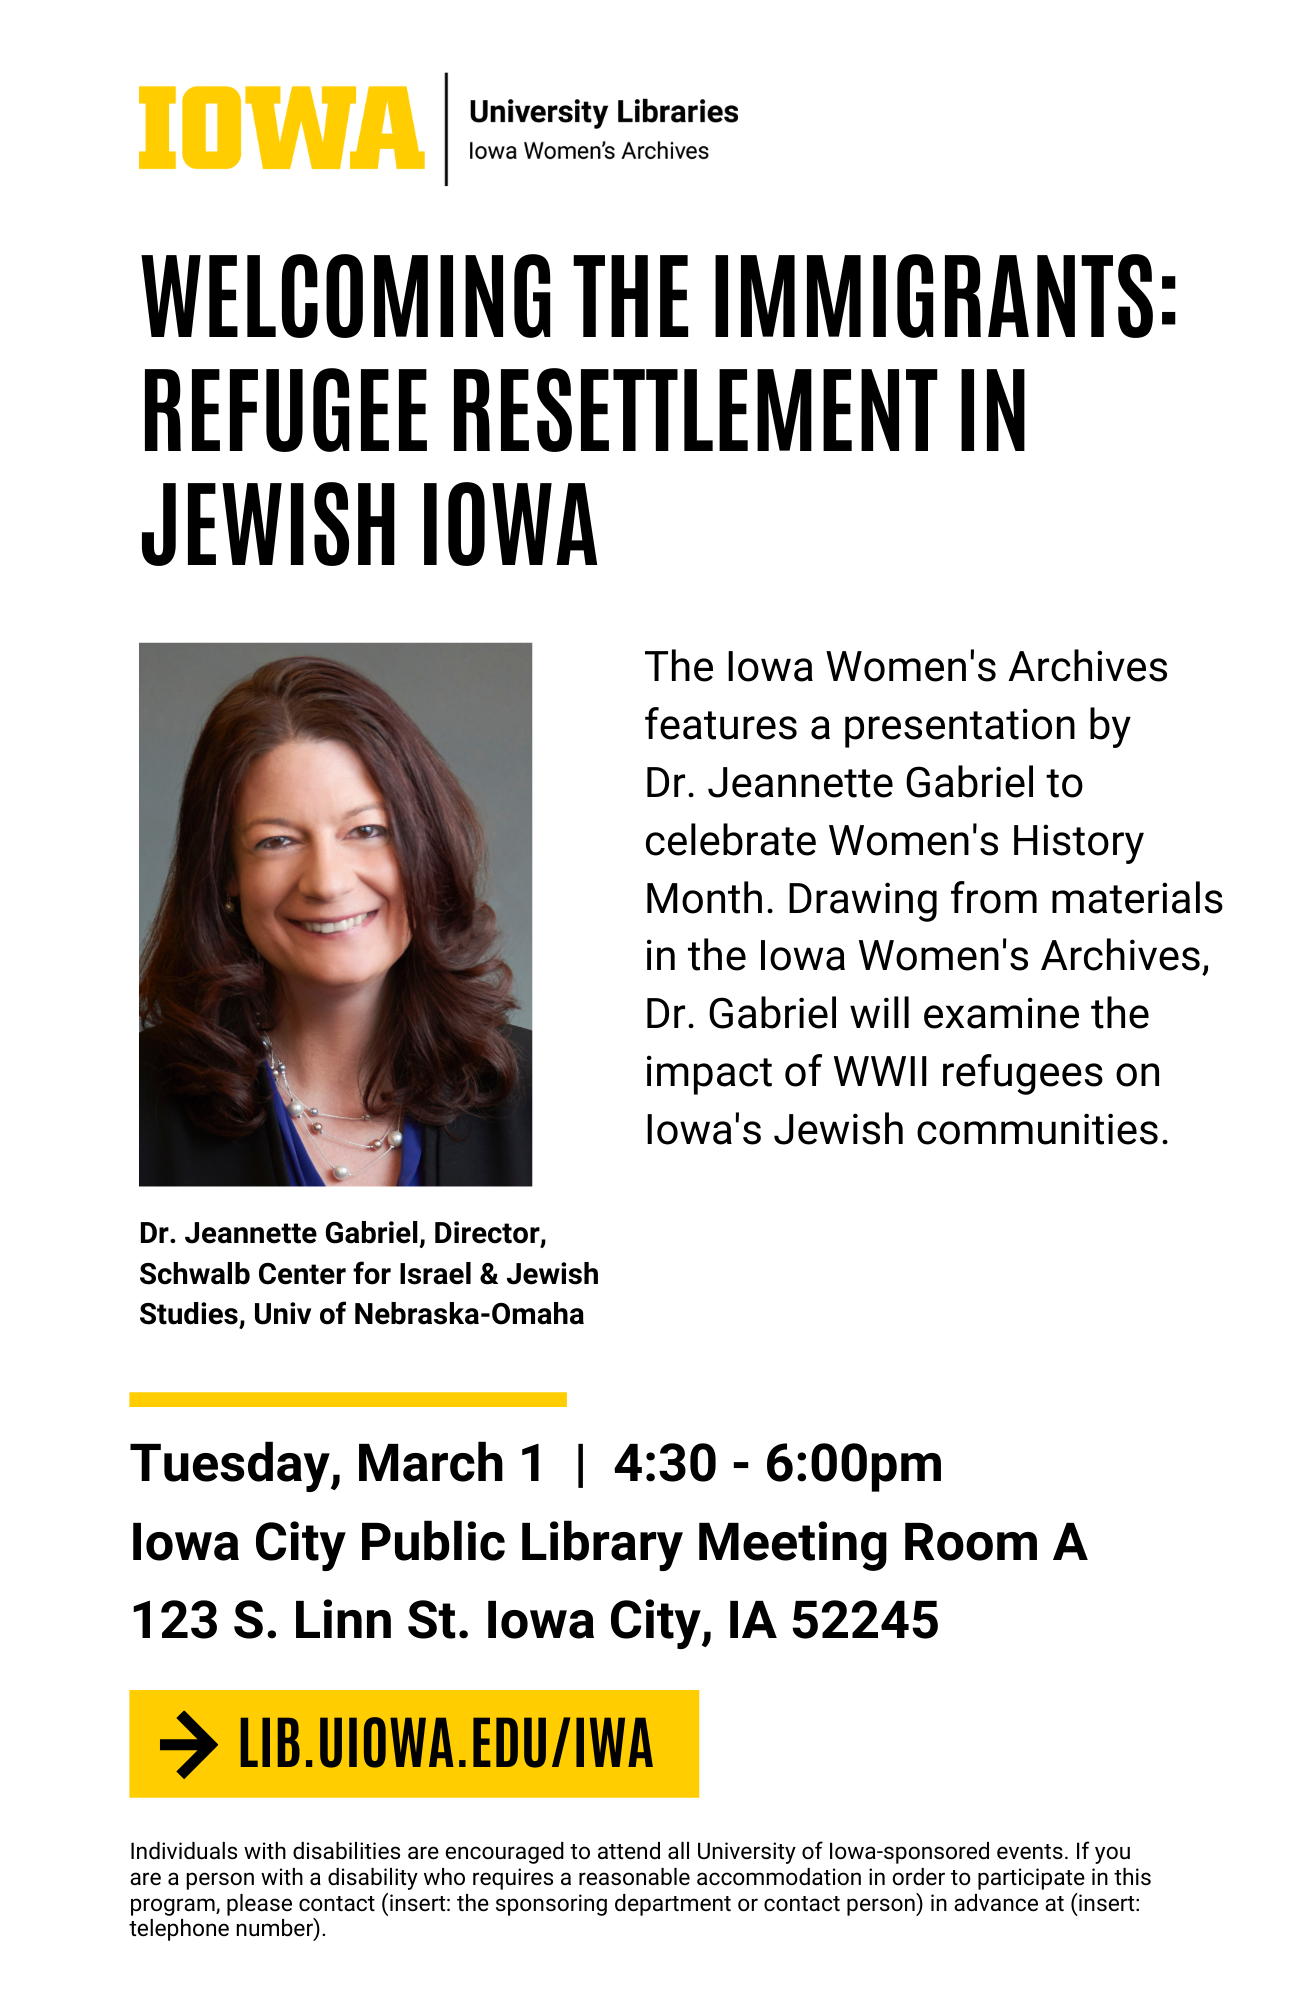 Flyer for Welcoming the Immigrants: Refugee Resettlement in Jewish Iowa